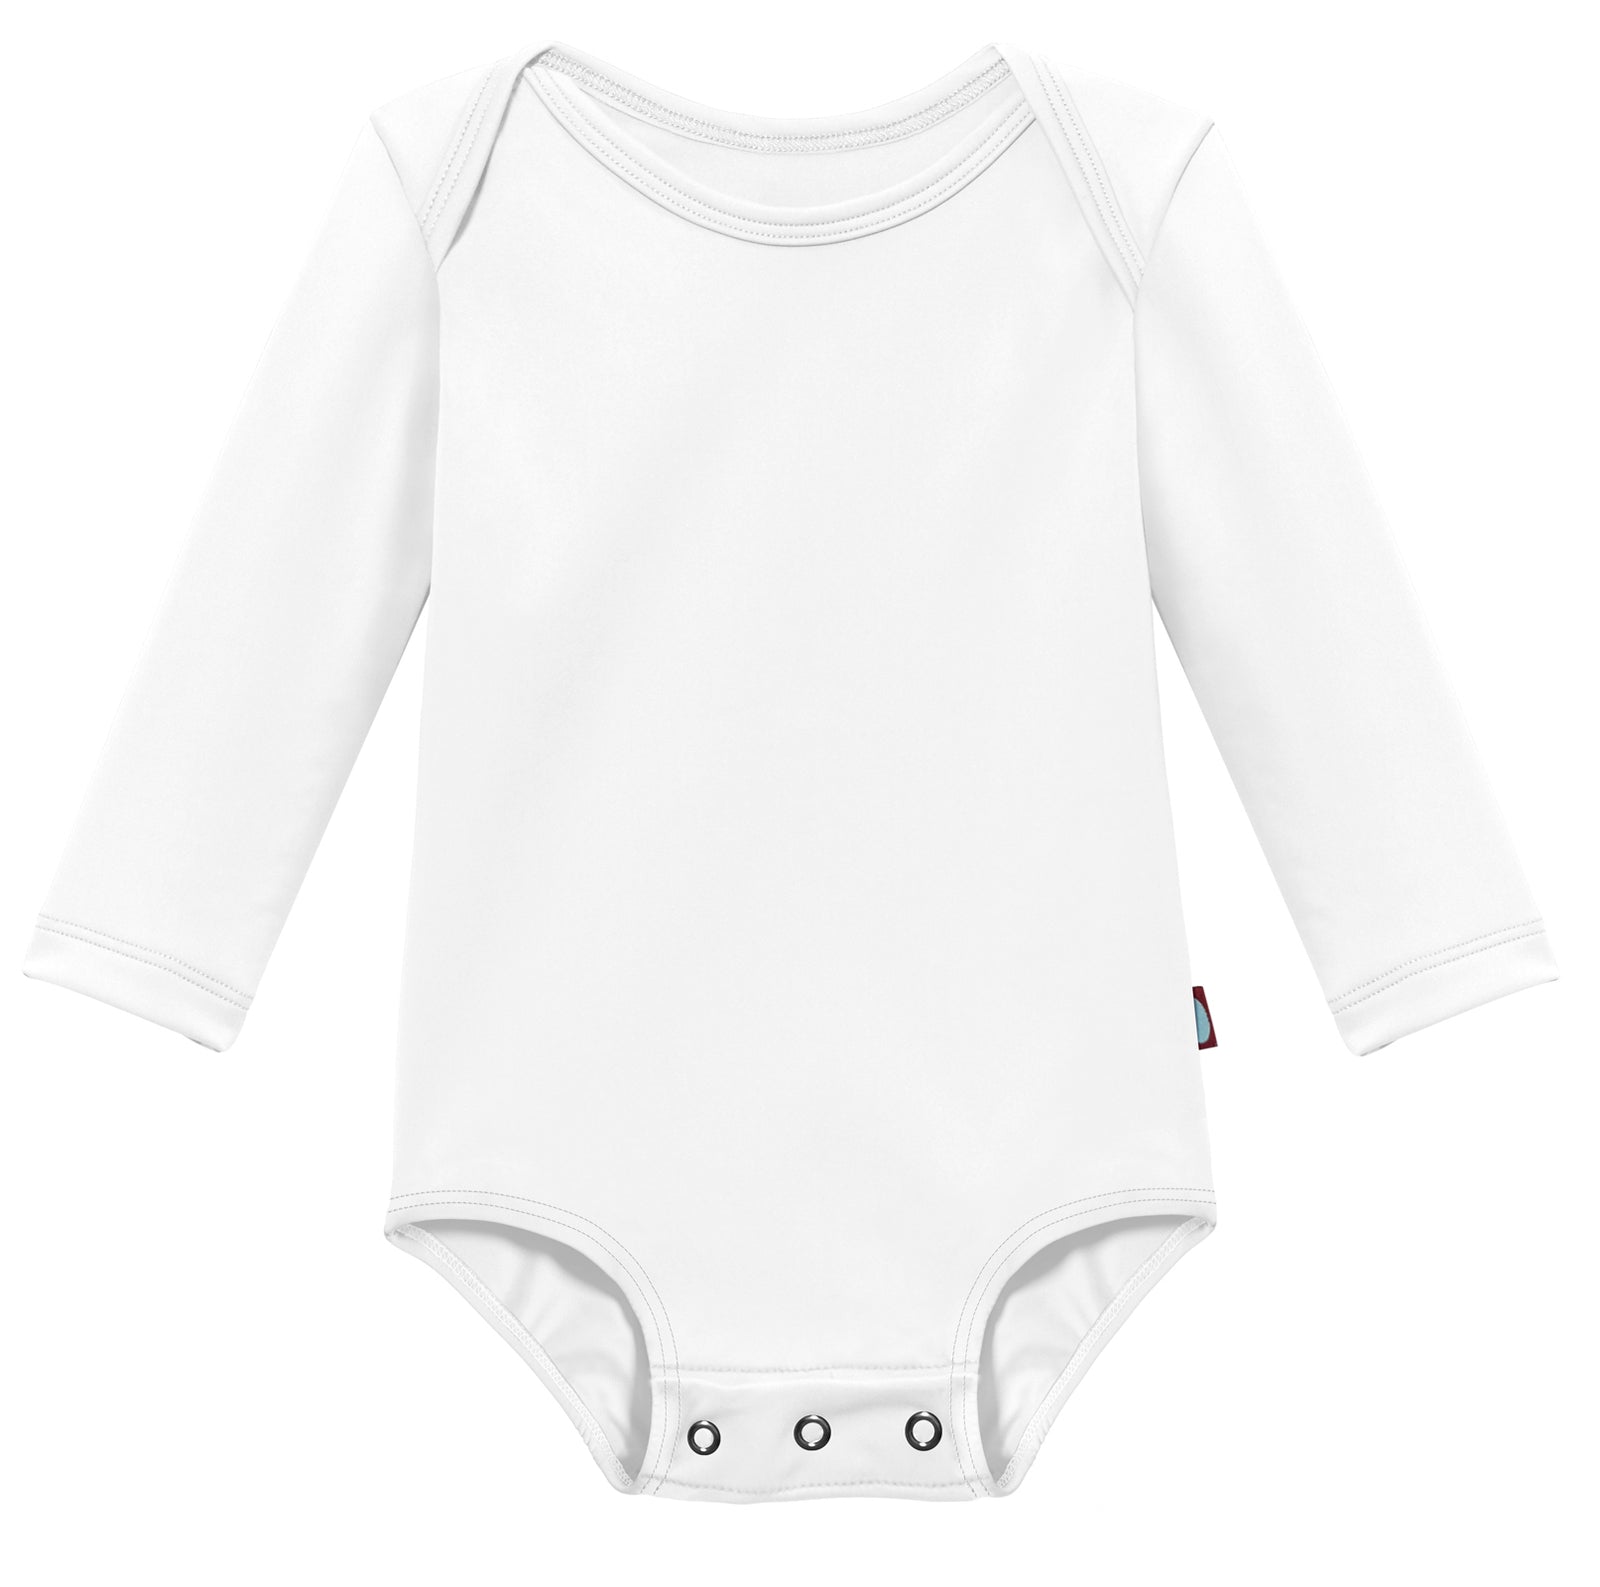 Baby Clothes | Baby Rompers and Underwear | City Threads - City Threads USA